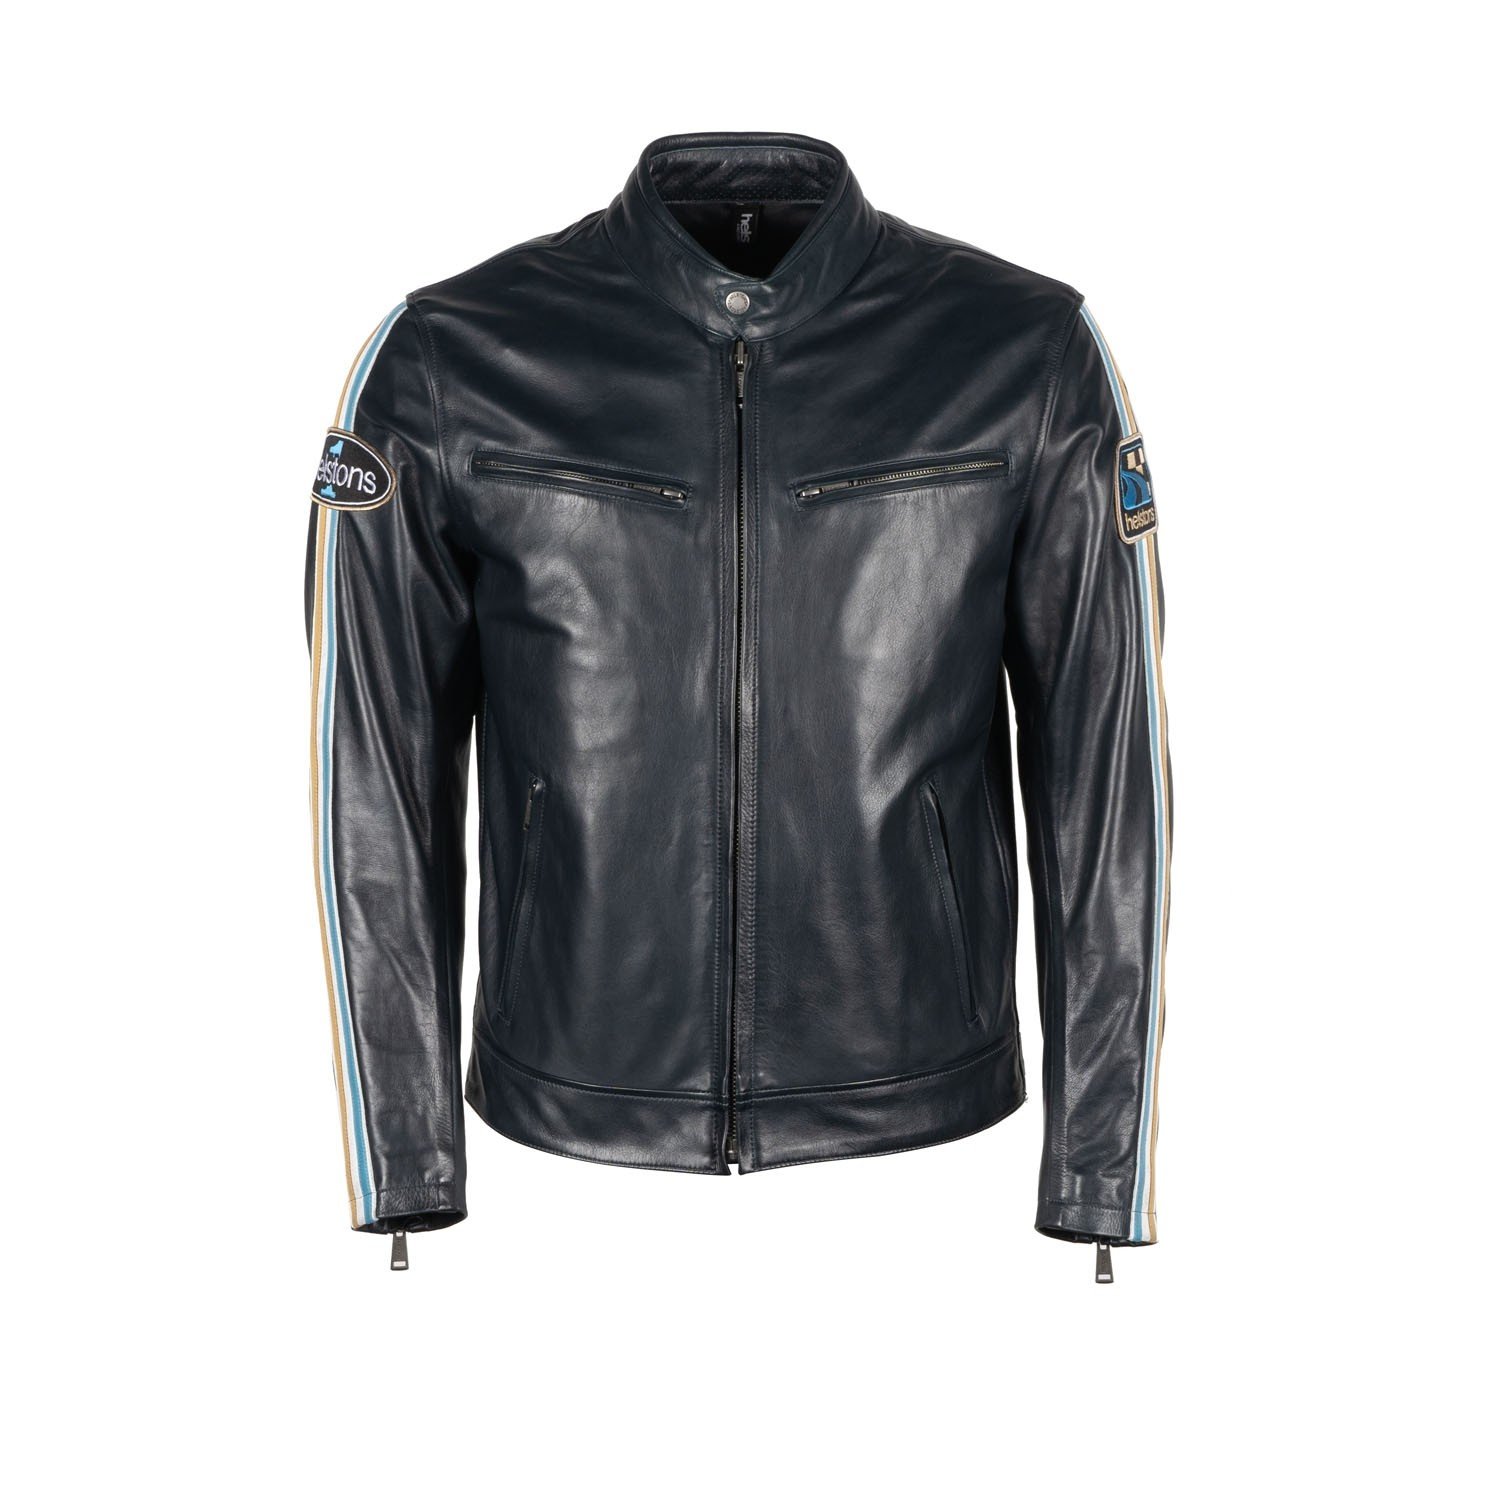 Image of Helstons Race Leather Aniline Jacket Blue Size L ID 3662136083202